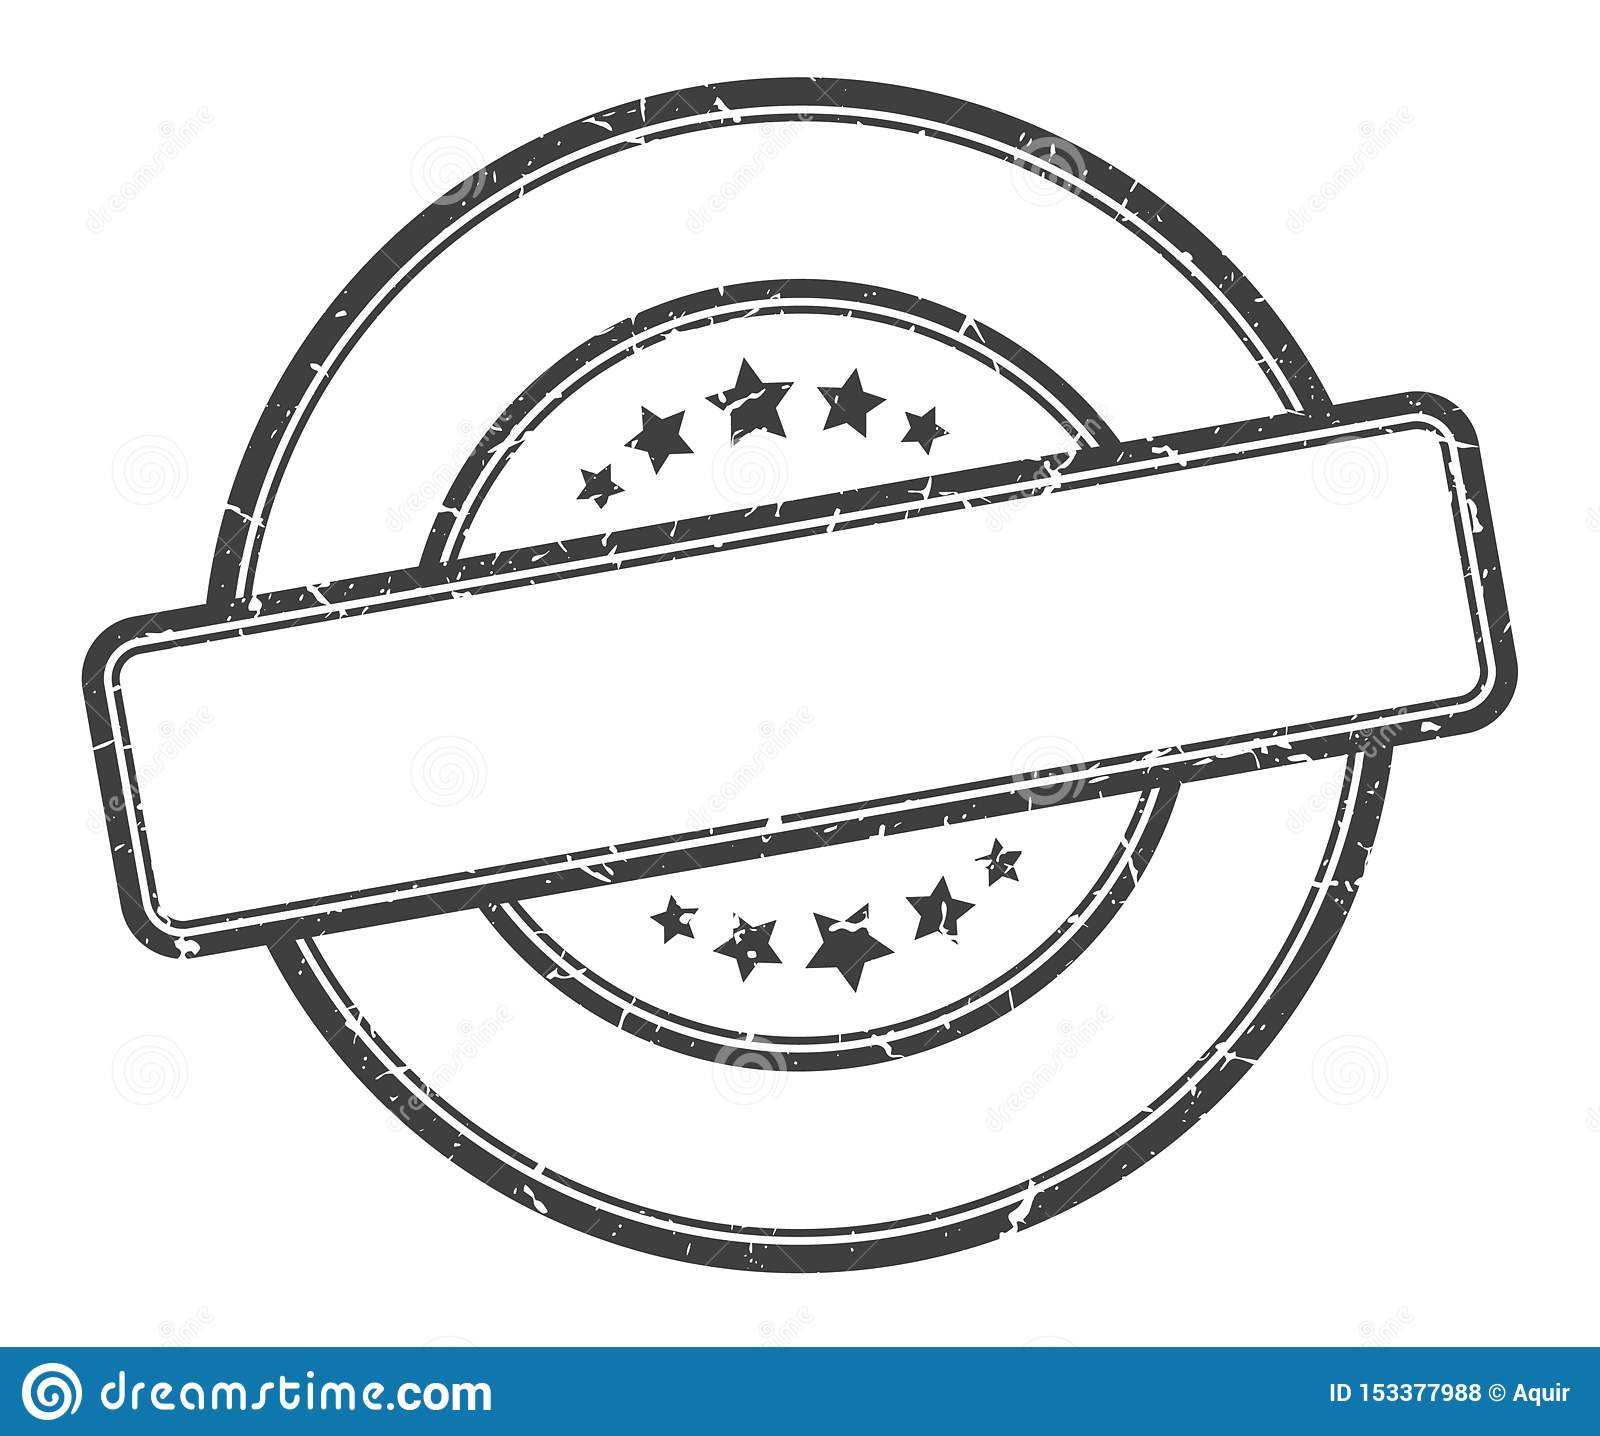 Blank Stamp Stock Vector. Illustration Of Textured, Template Within Blank Seal Template